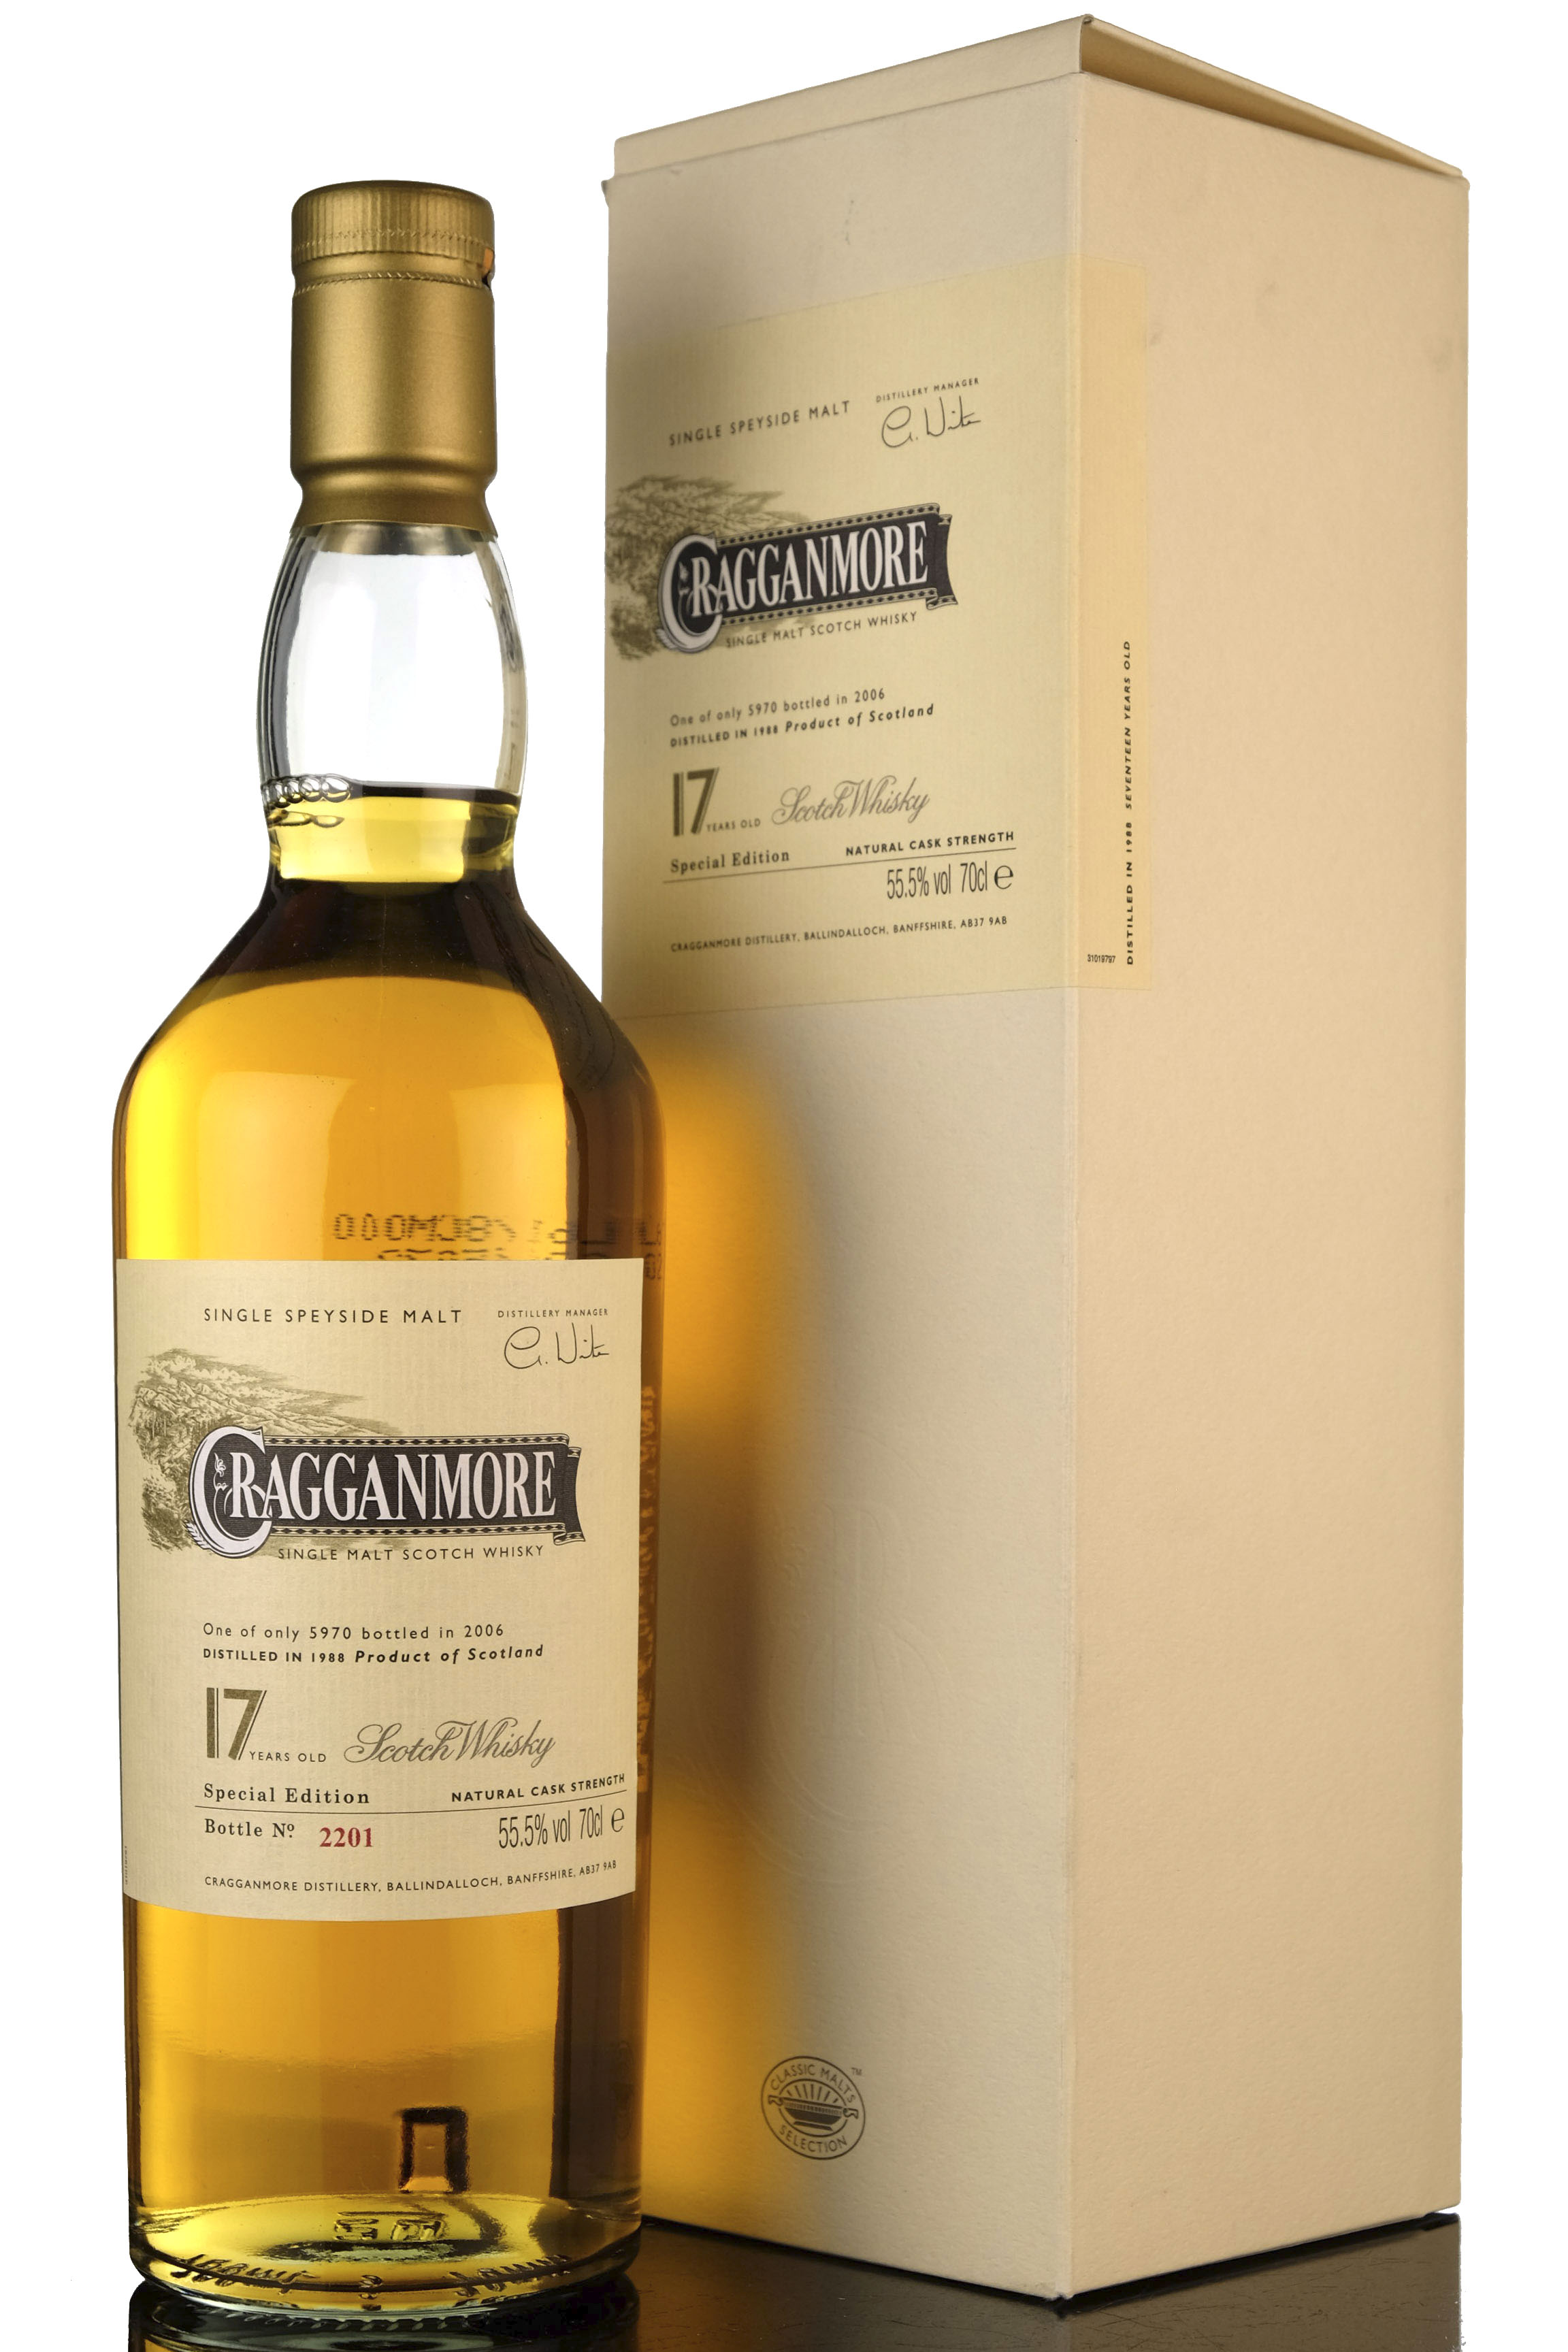 Cragganmore 1988-2006 - 17 Year Old